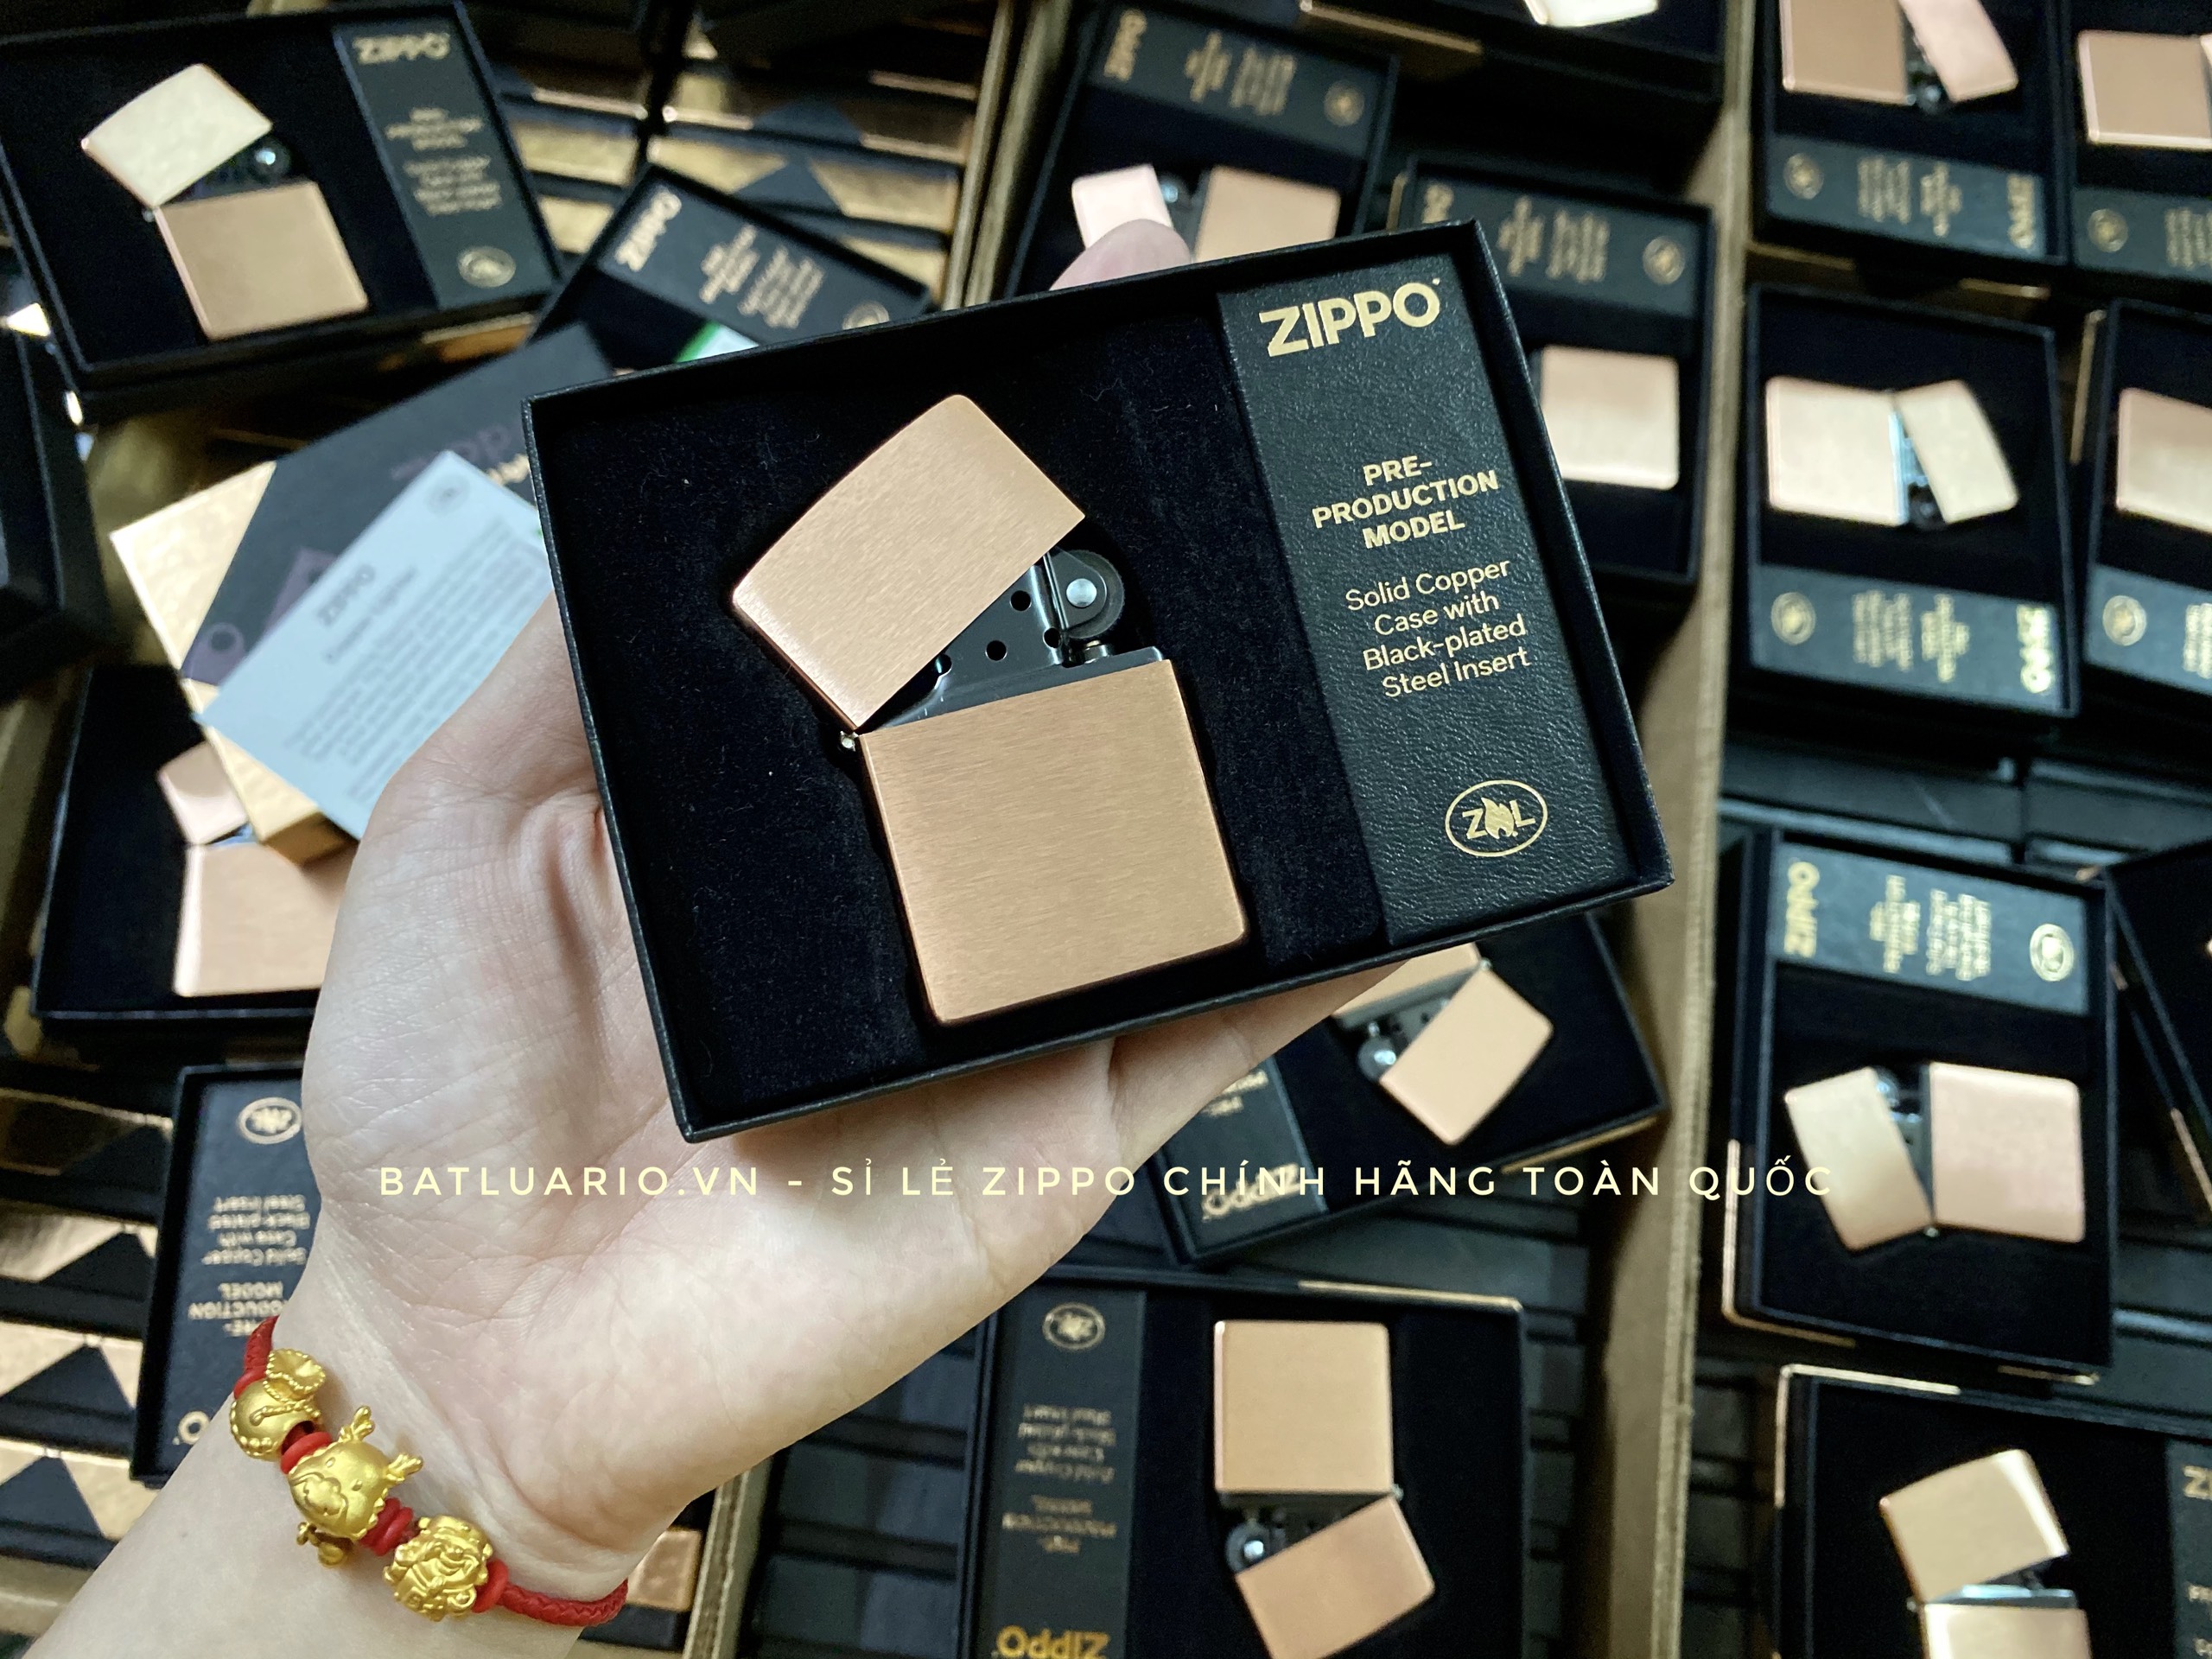 Zippo 48107 - Zippo Solid Copper - Zippo Copper Case With Black Coated Stainless Steel Insert - Zippo Đồng Đỏ Nguyên Khối 2022 81